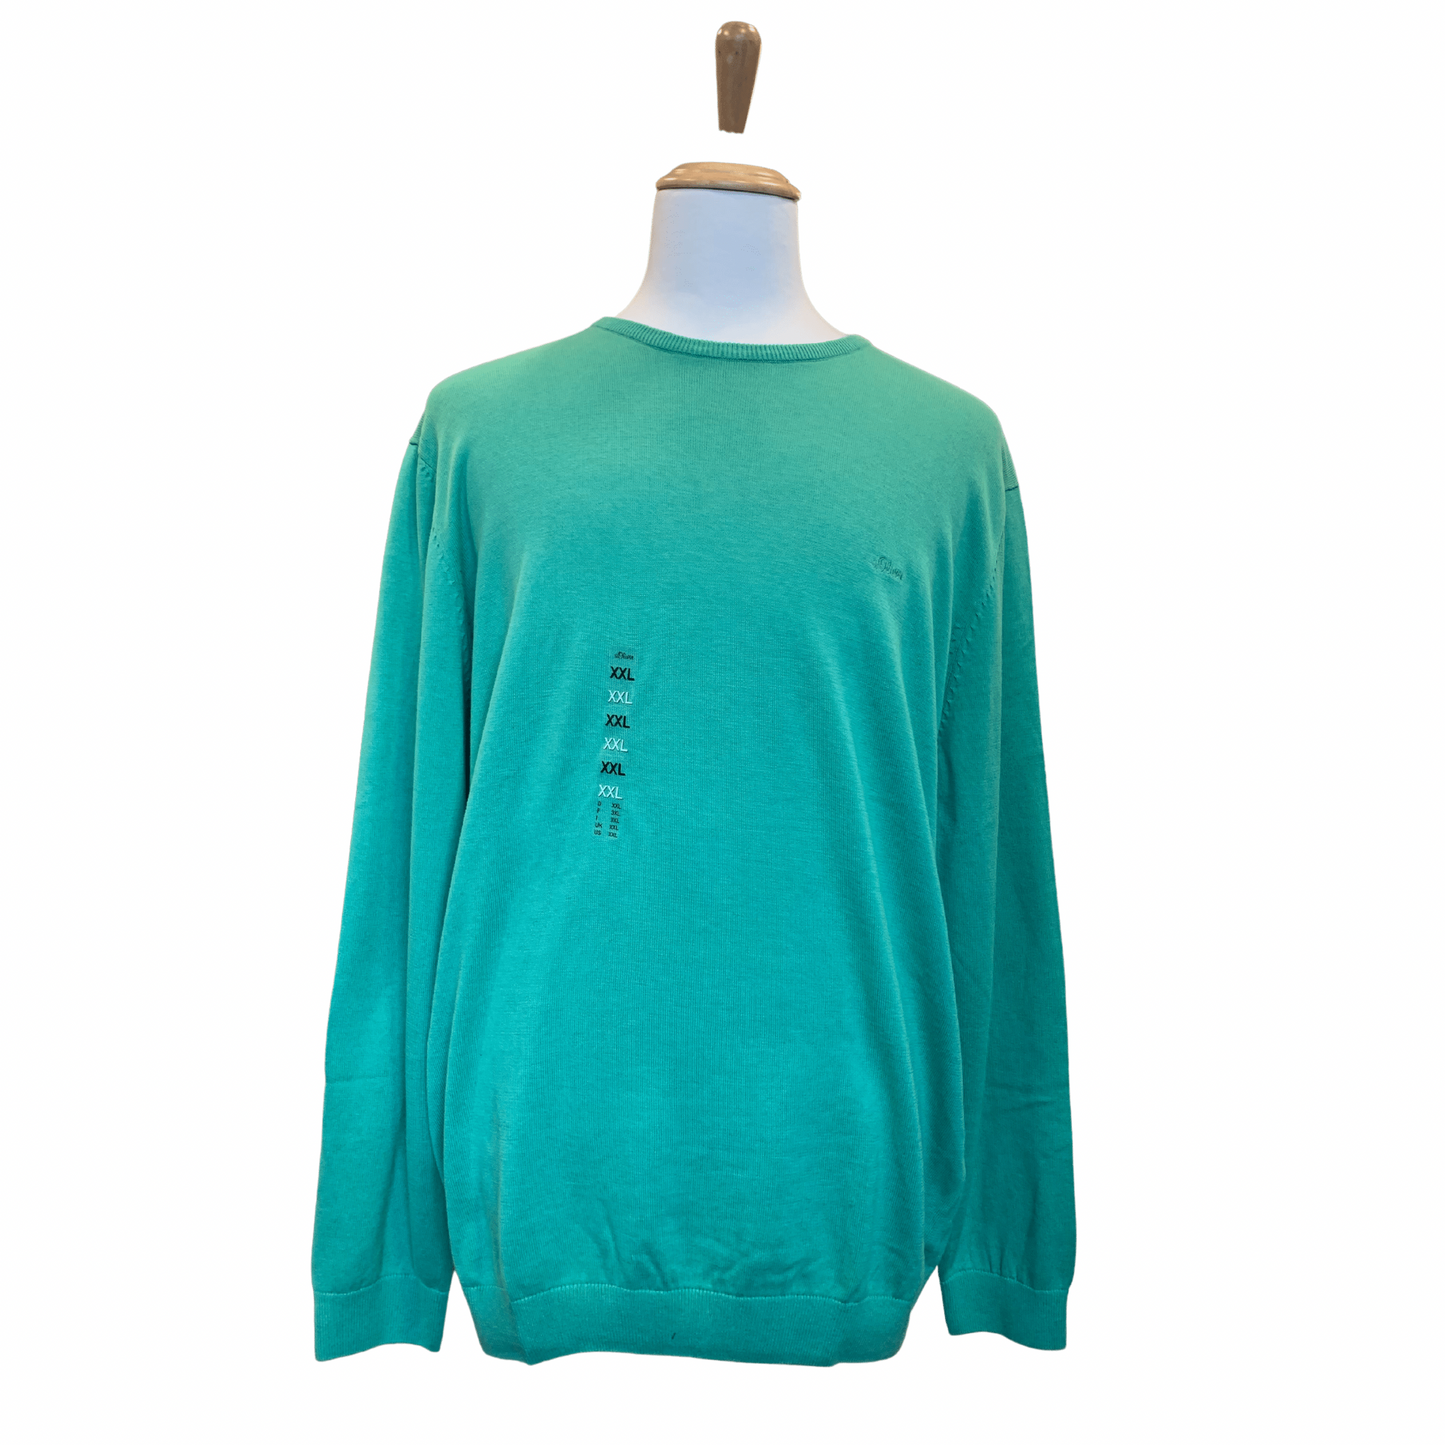 Sweater S.Oliver green 2xl 3xl 